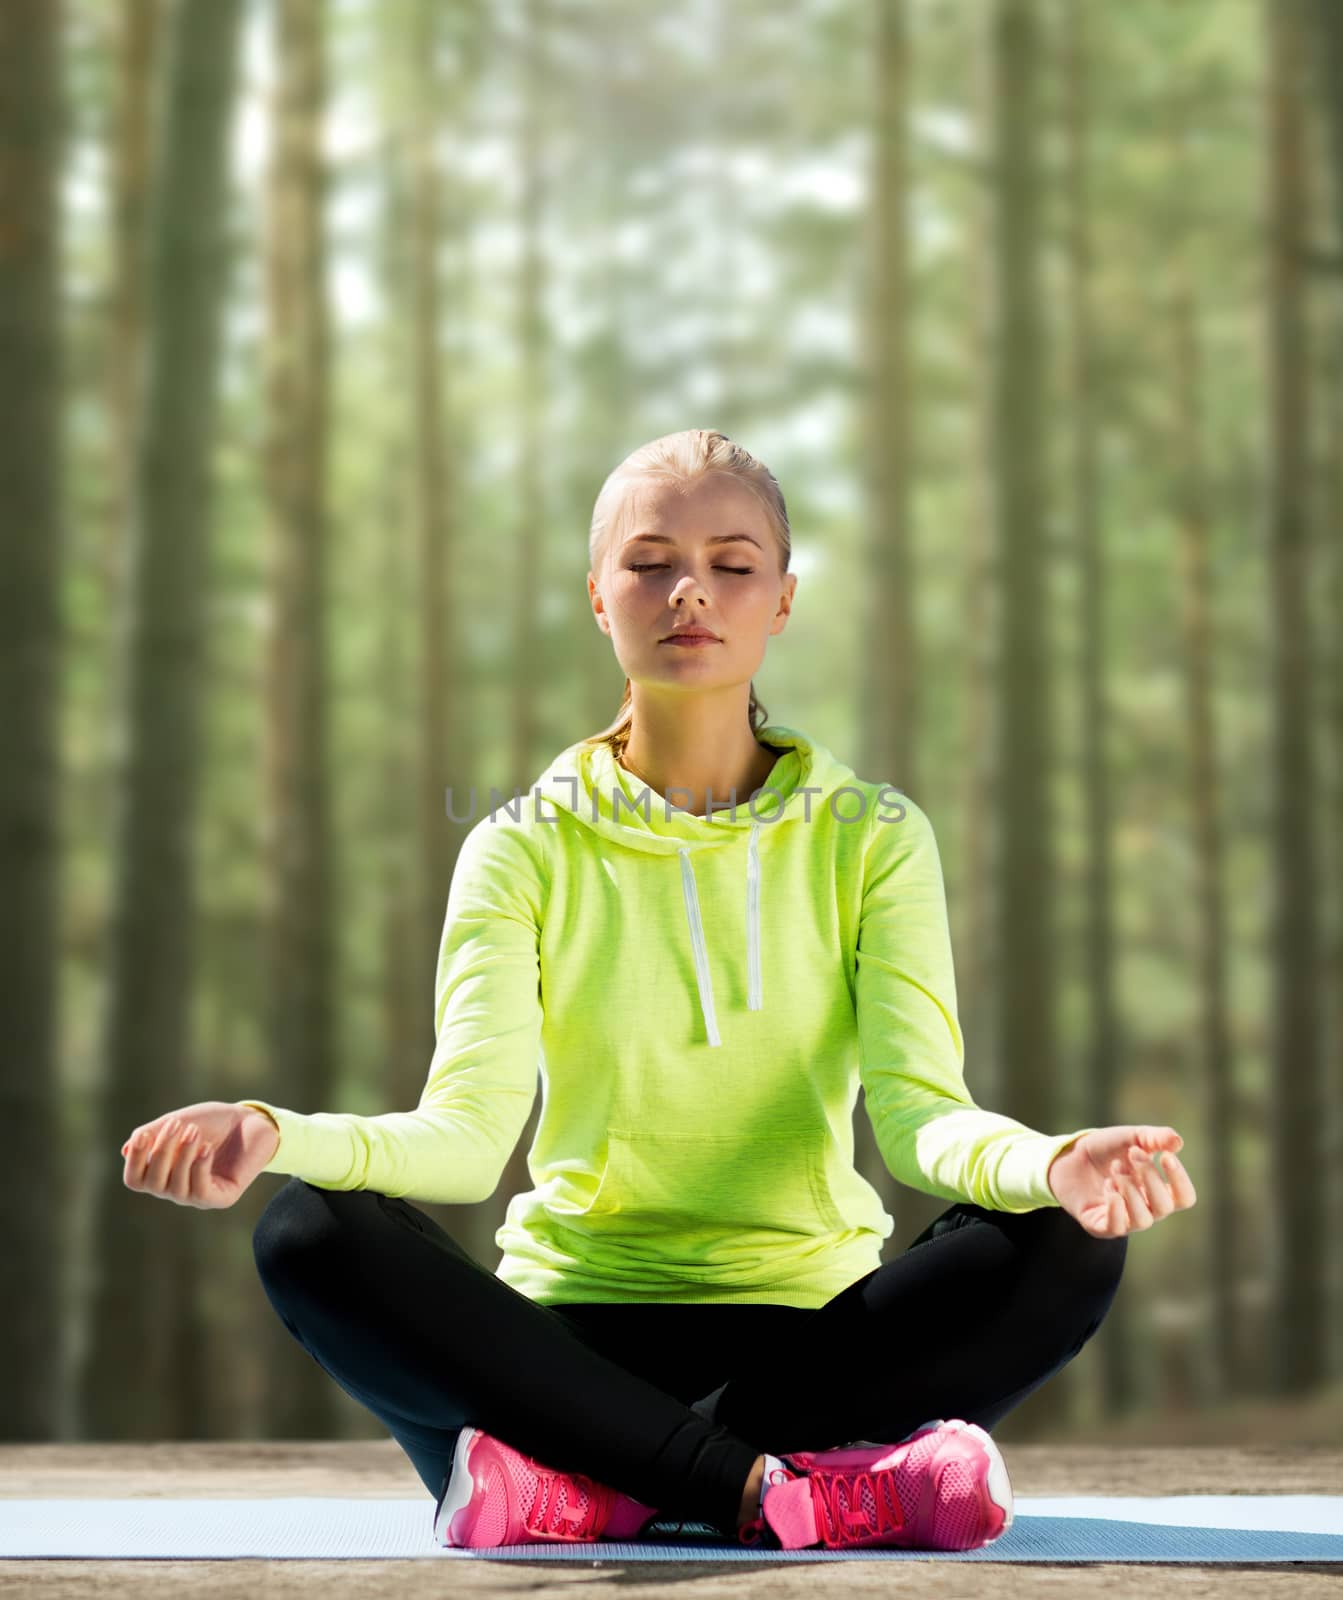 sport, fitness, yoga and people concept - happy young woman meditating in lotus pose and sitting on mat over woods background